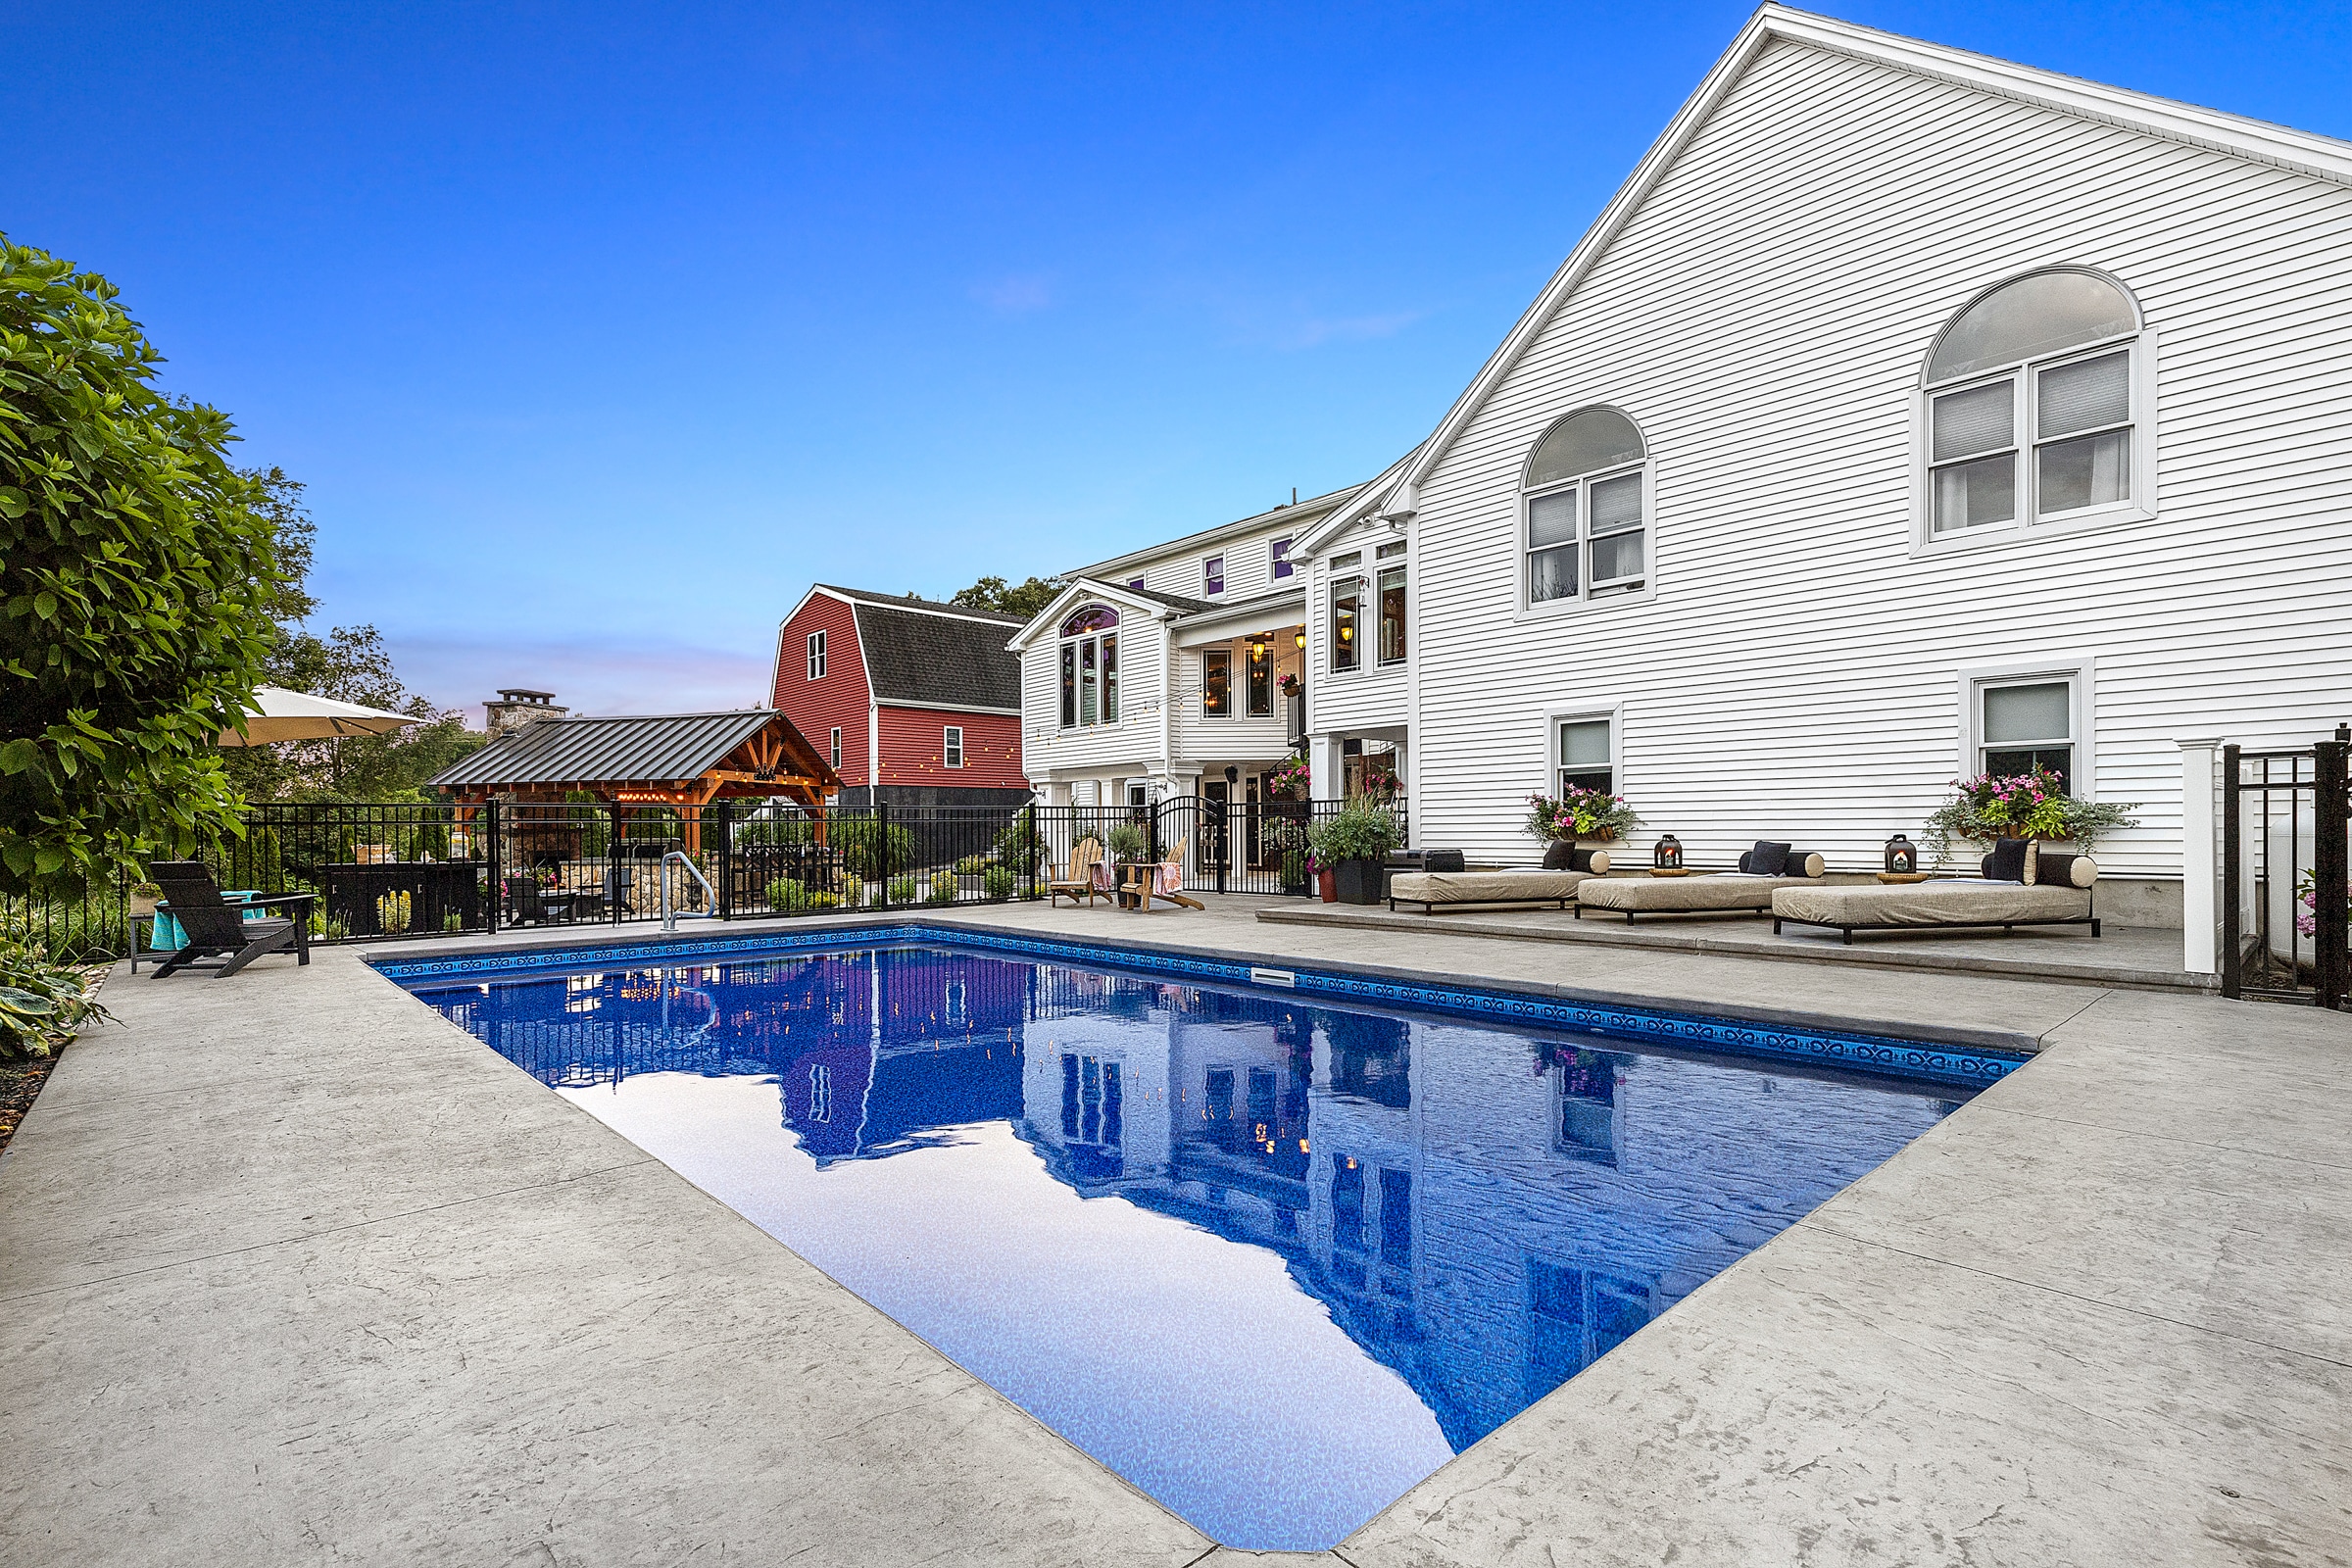 Seamless, textured, stamped concrete was used for the pool deck at this home in Auburn, Massachusetts.